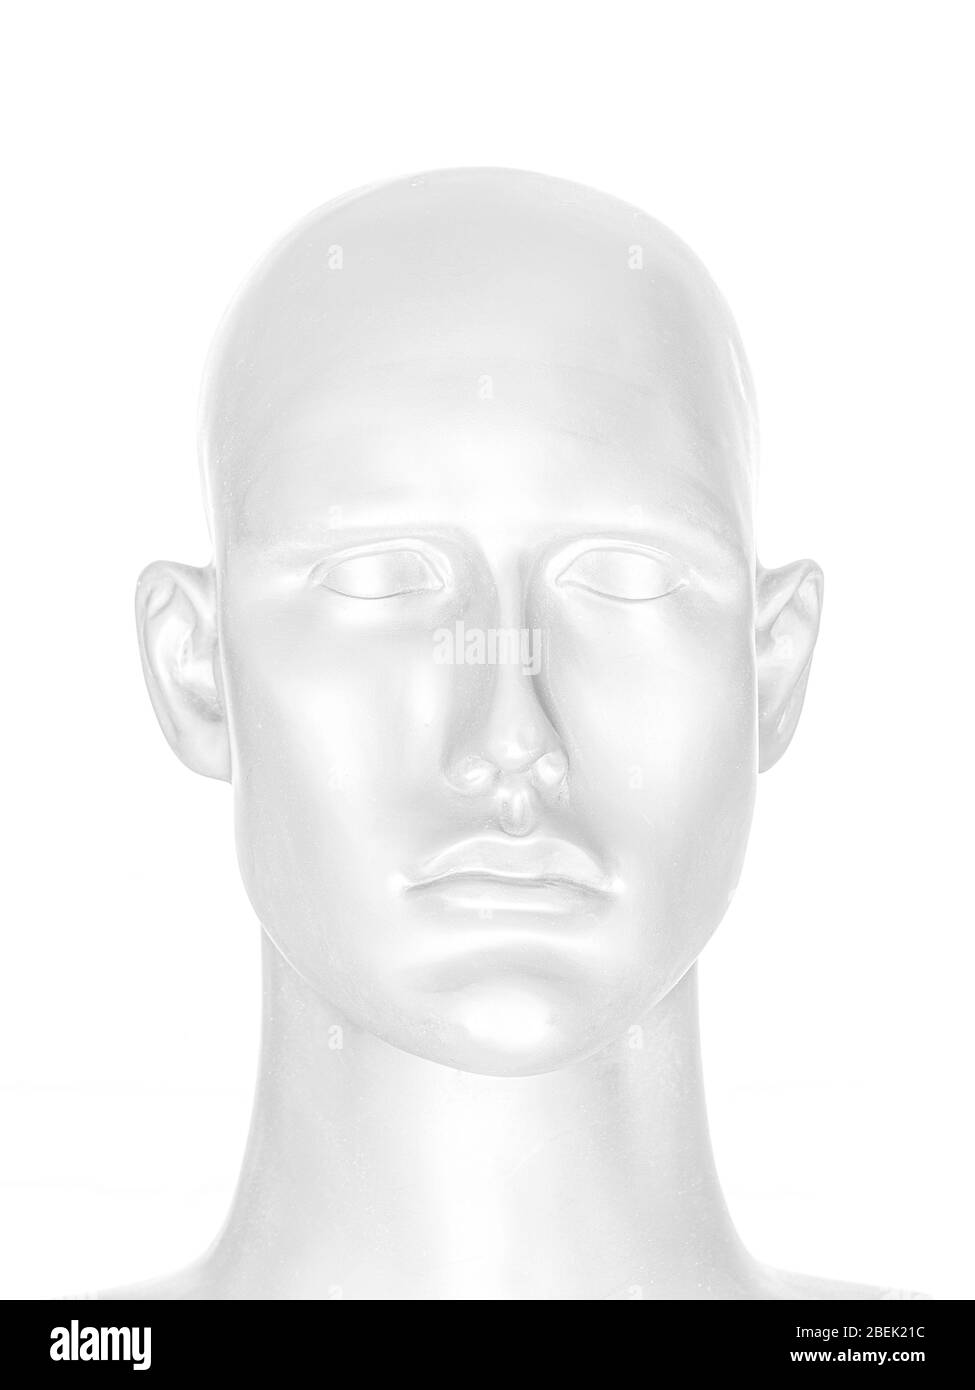 Abstract image of human face, portrait of mannequin head in high-key style Stock Photo